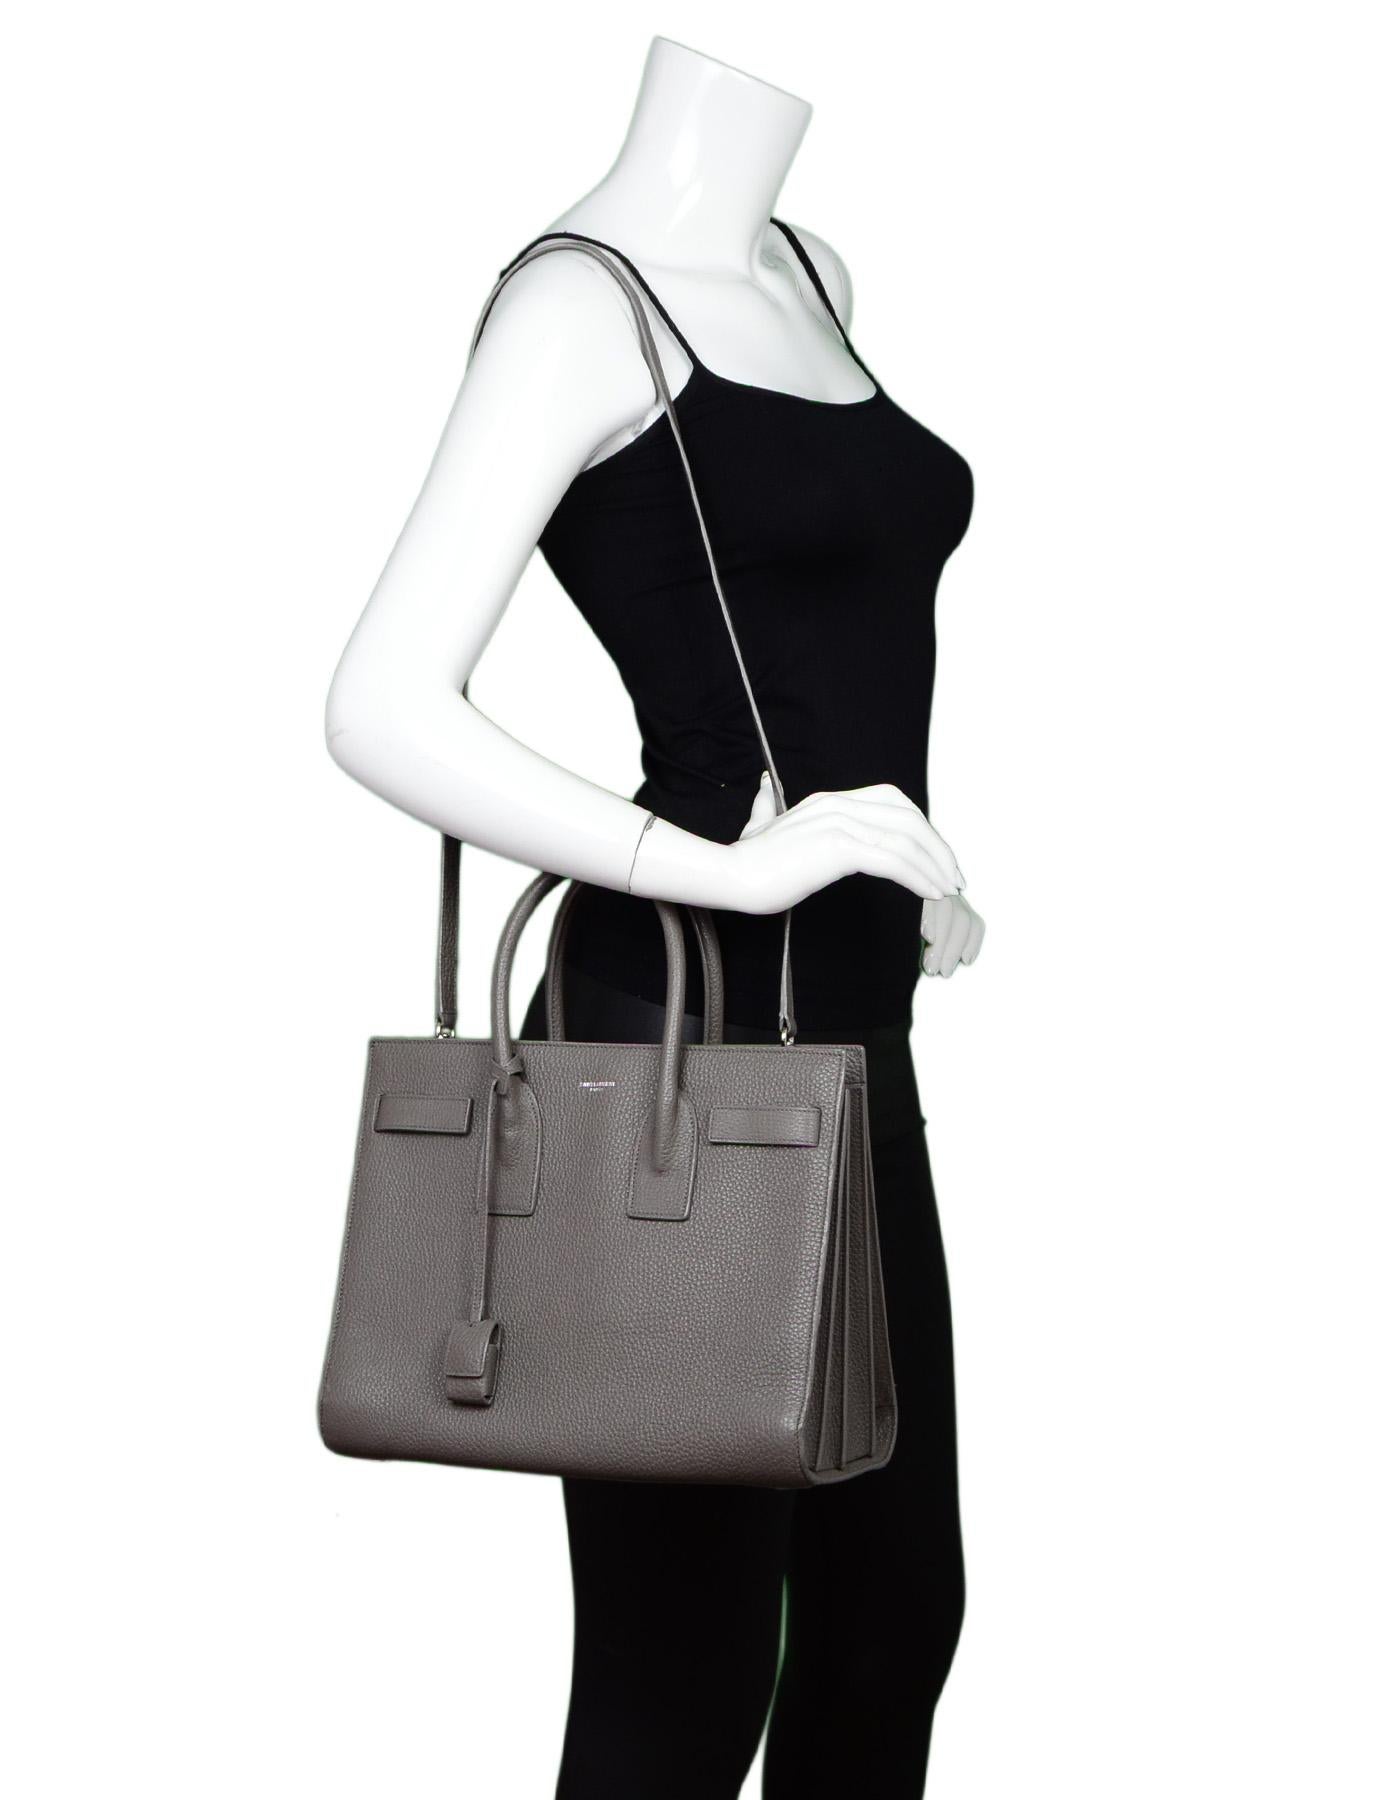 YSL Yves Saint Laurent Grey Pebbled Leather Small Sac De Jour Tote Bag W/ Dust Bag

Made In: Italy
Color: Grey
Hardware: Silvertone
Materials: Leather, metal
Lining: Black textile
Closure/Opening: Open top
Exterior Pockets: None
Interior Pockets: